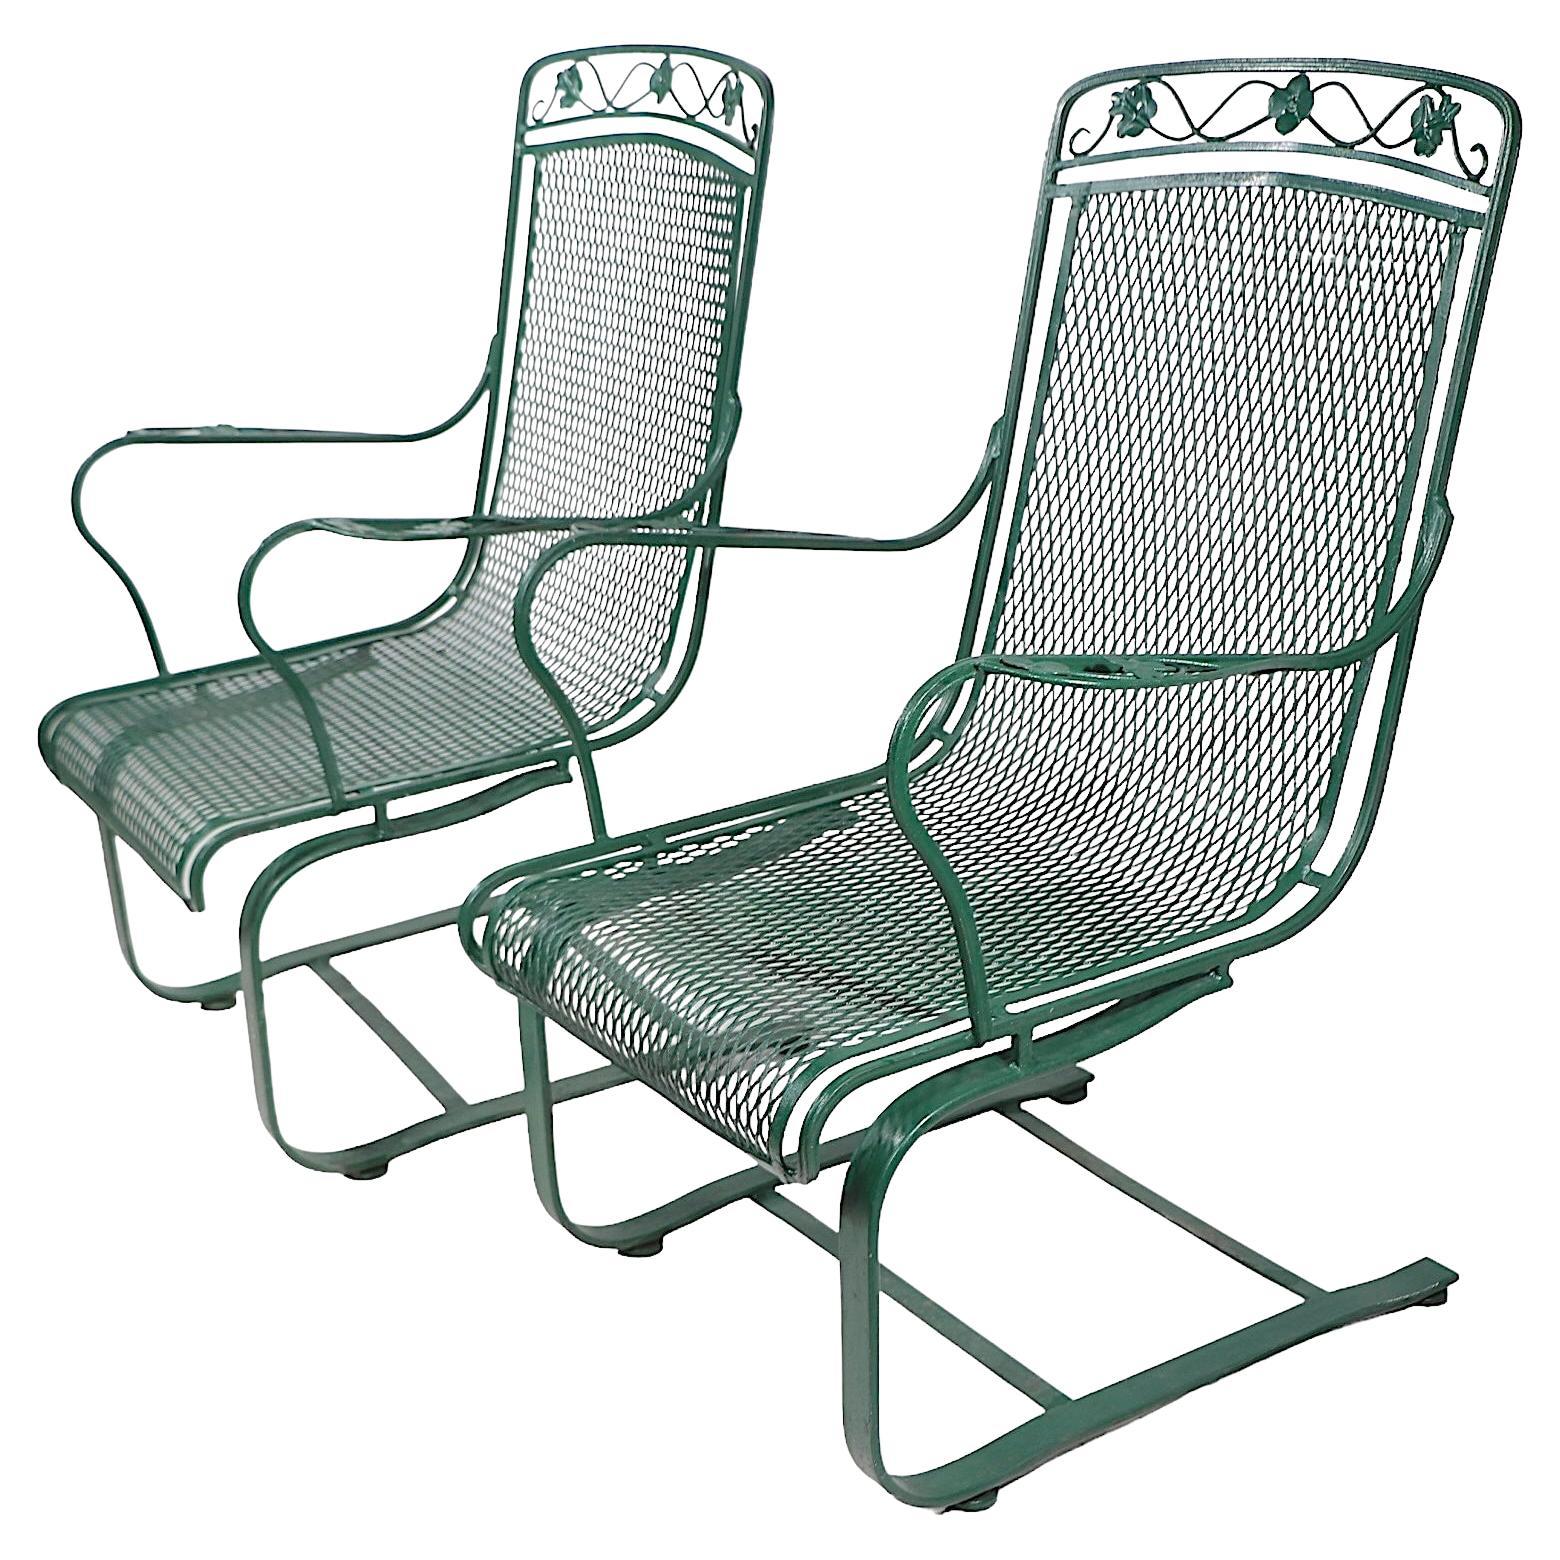 Pr. Cantilevered  Meadowcraft Dogwood Wrought Iron Lounge Chairs  For Sale